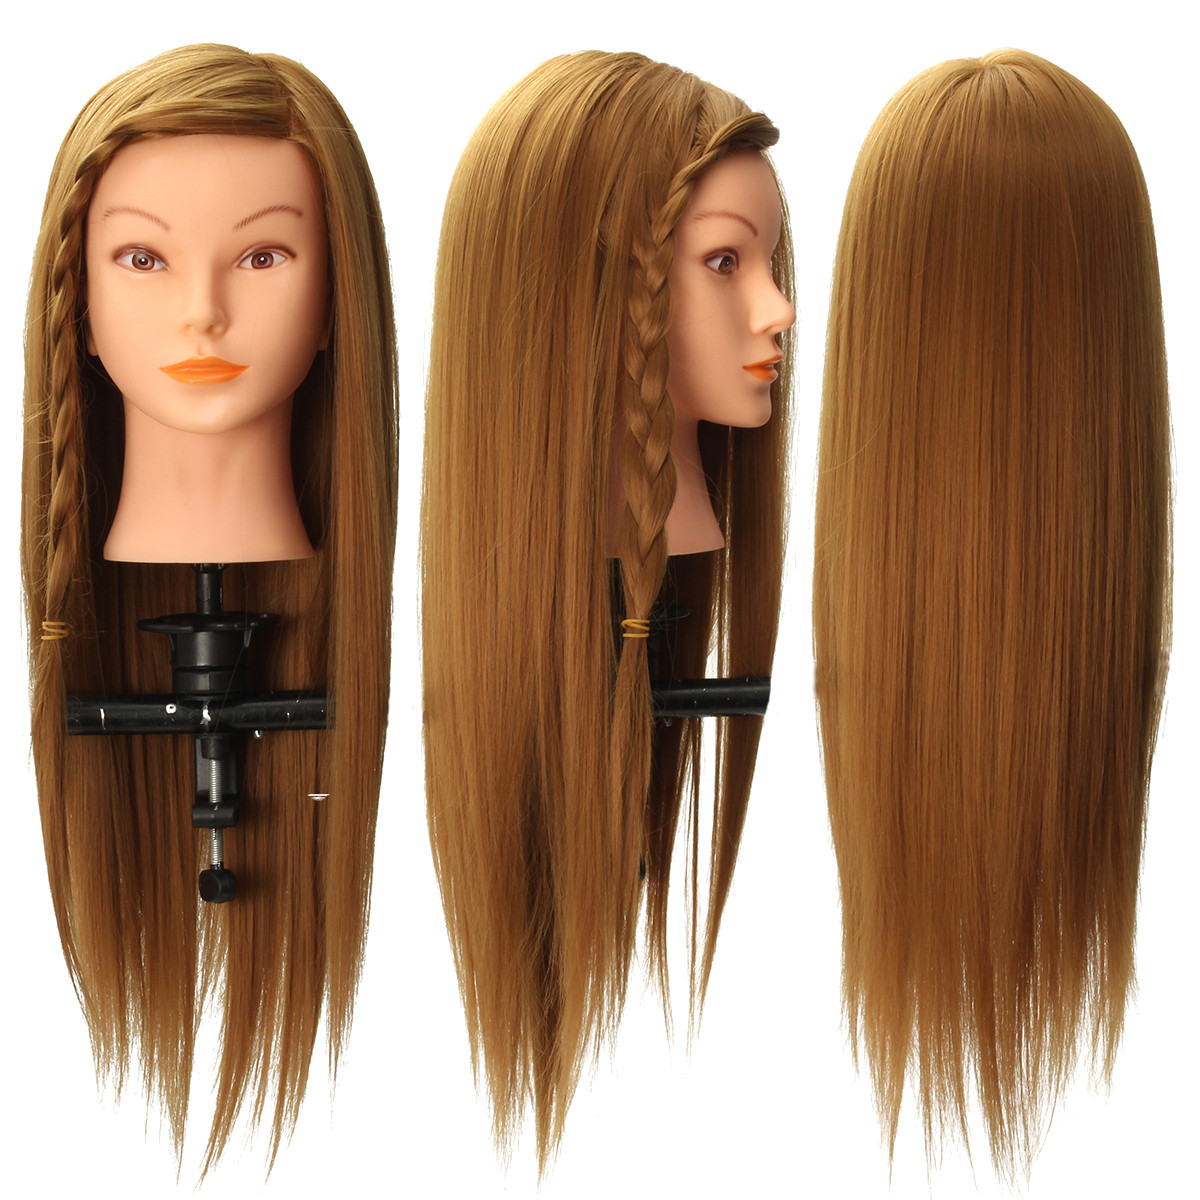 20quot-Long-Hair-Mannequin-Manikin-Training-Salon-Head-Model-Hairdressing-Cosmetology-with-Clamp-Hol-1110744